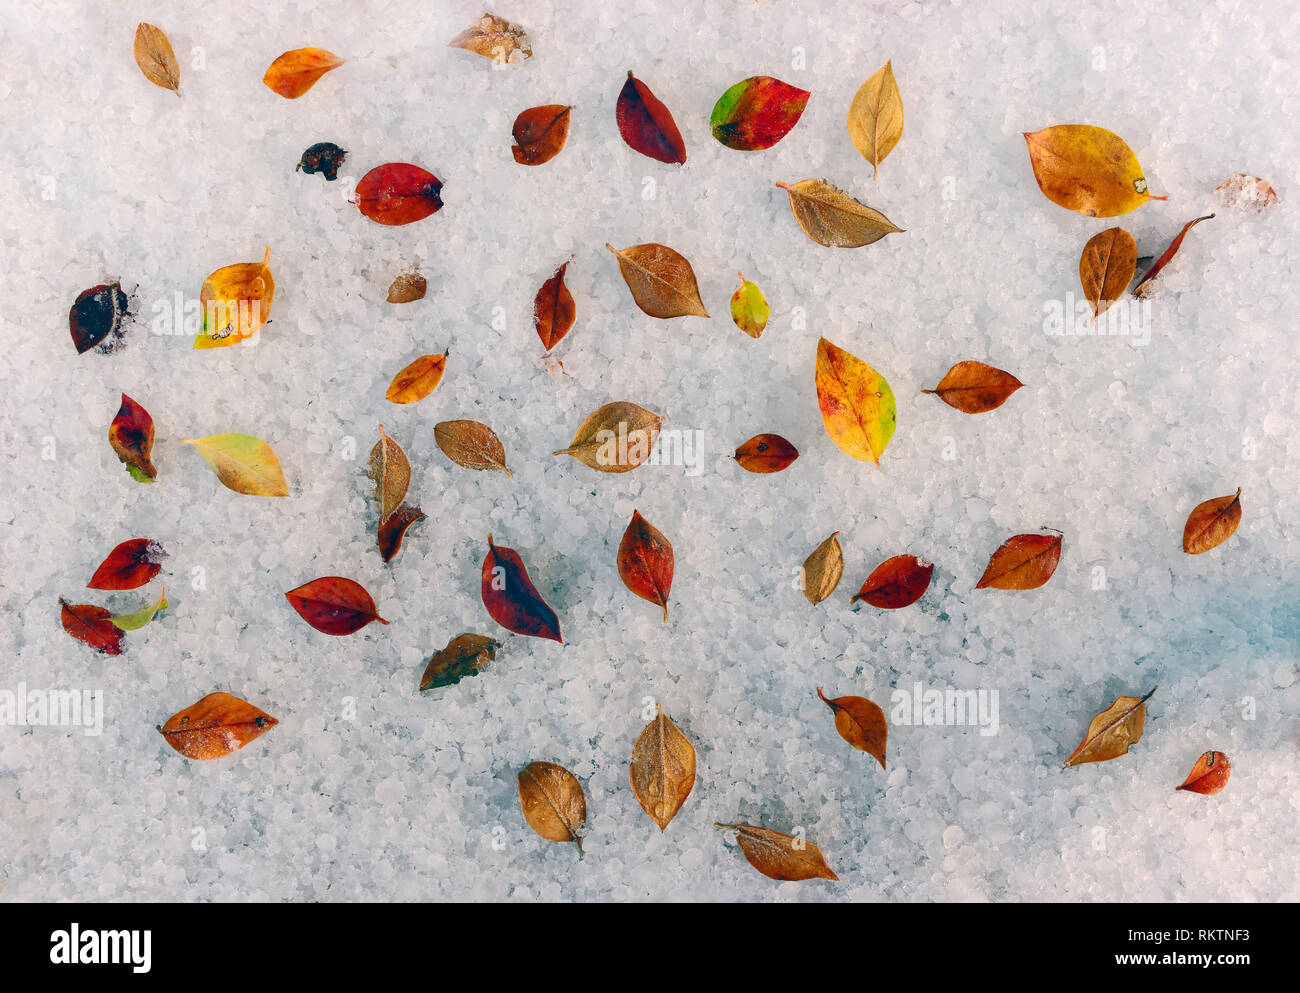 Fallen leaves on a fresh snow. Stock Photo